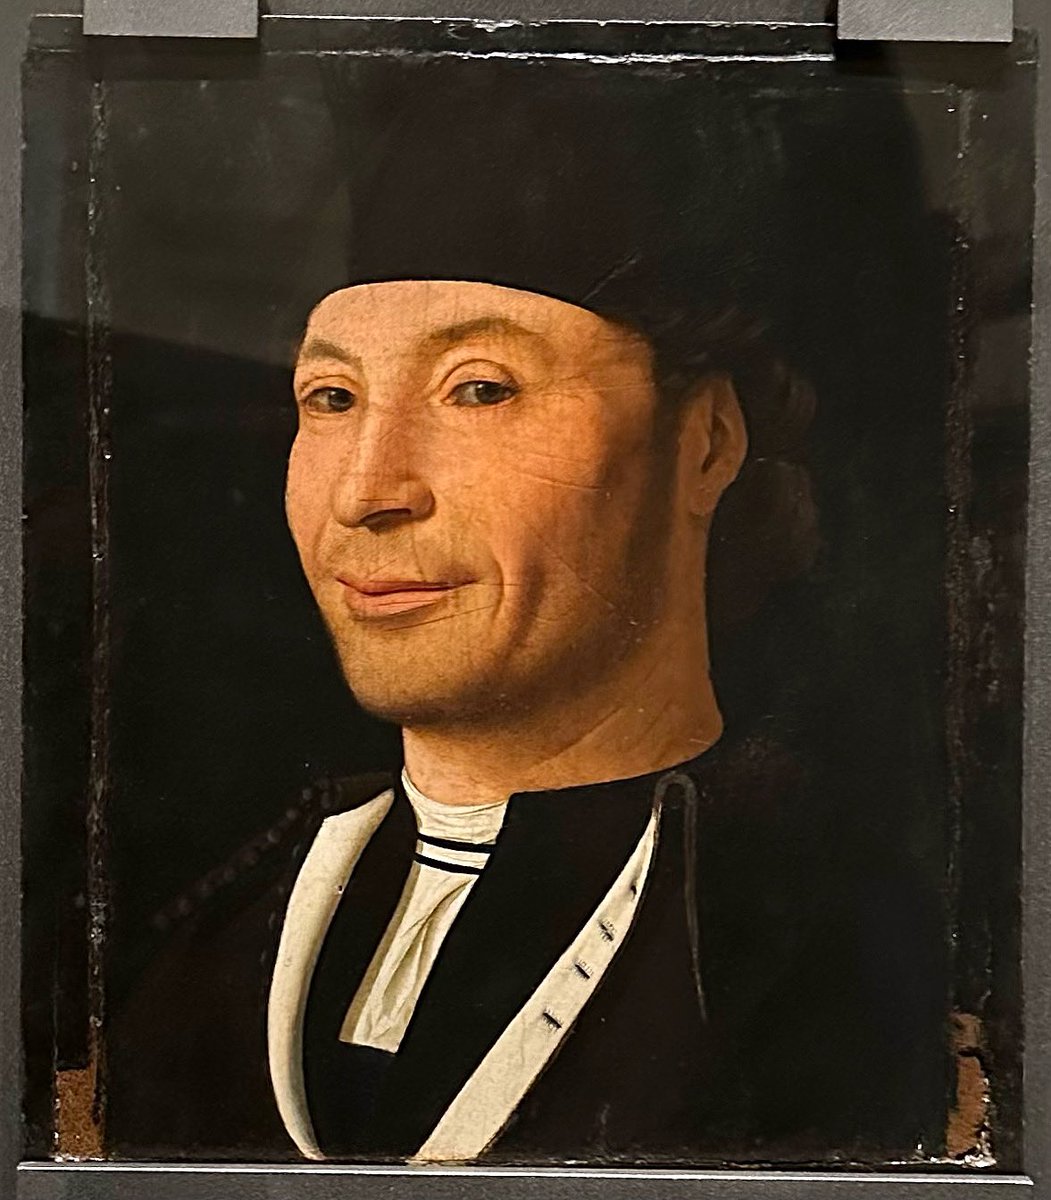 “Portrait of a Man” by Antonello da Messina, 1480s, is the main exhibit of Cefalu Art Museum/ Mandralisca Museum, an institution based on the collection of the local notable from the period of Risorgimento, Francesco Pirajno, Baron of Mandralisca. The painting was found by 1/2